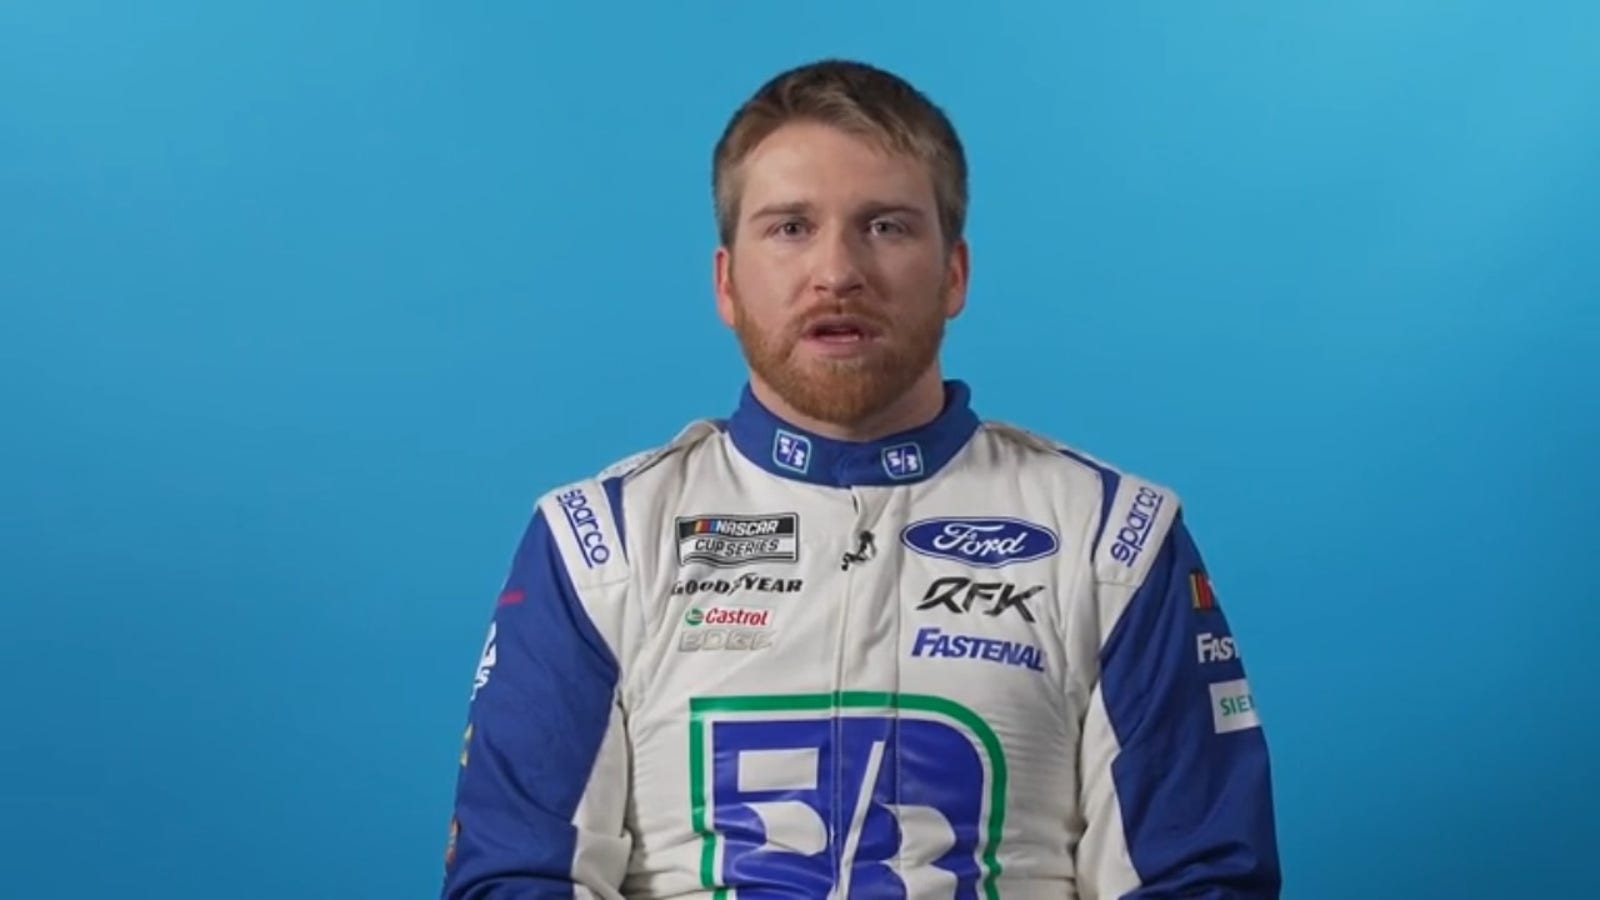 Buescher shares excitement for RFK's upcoming season